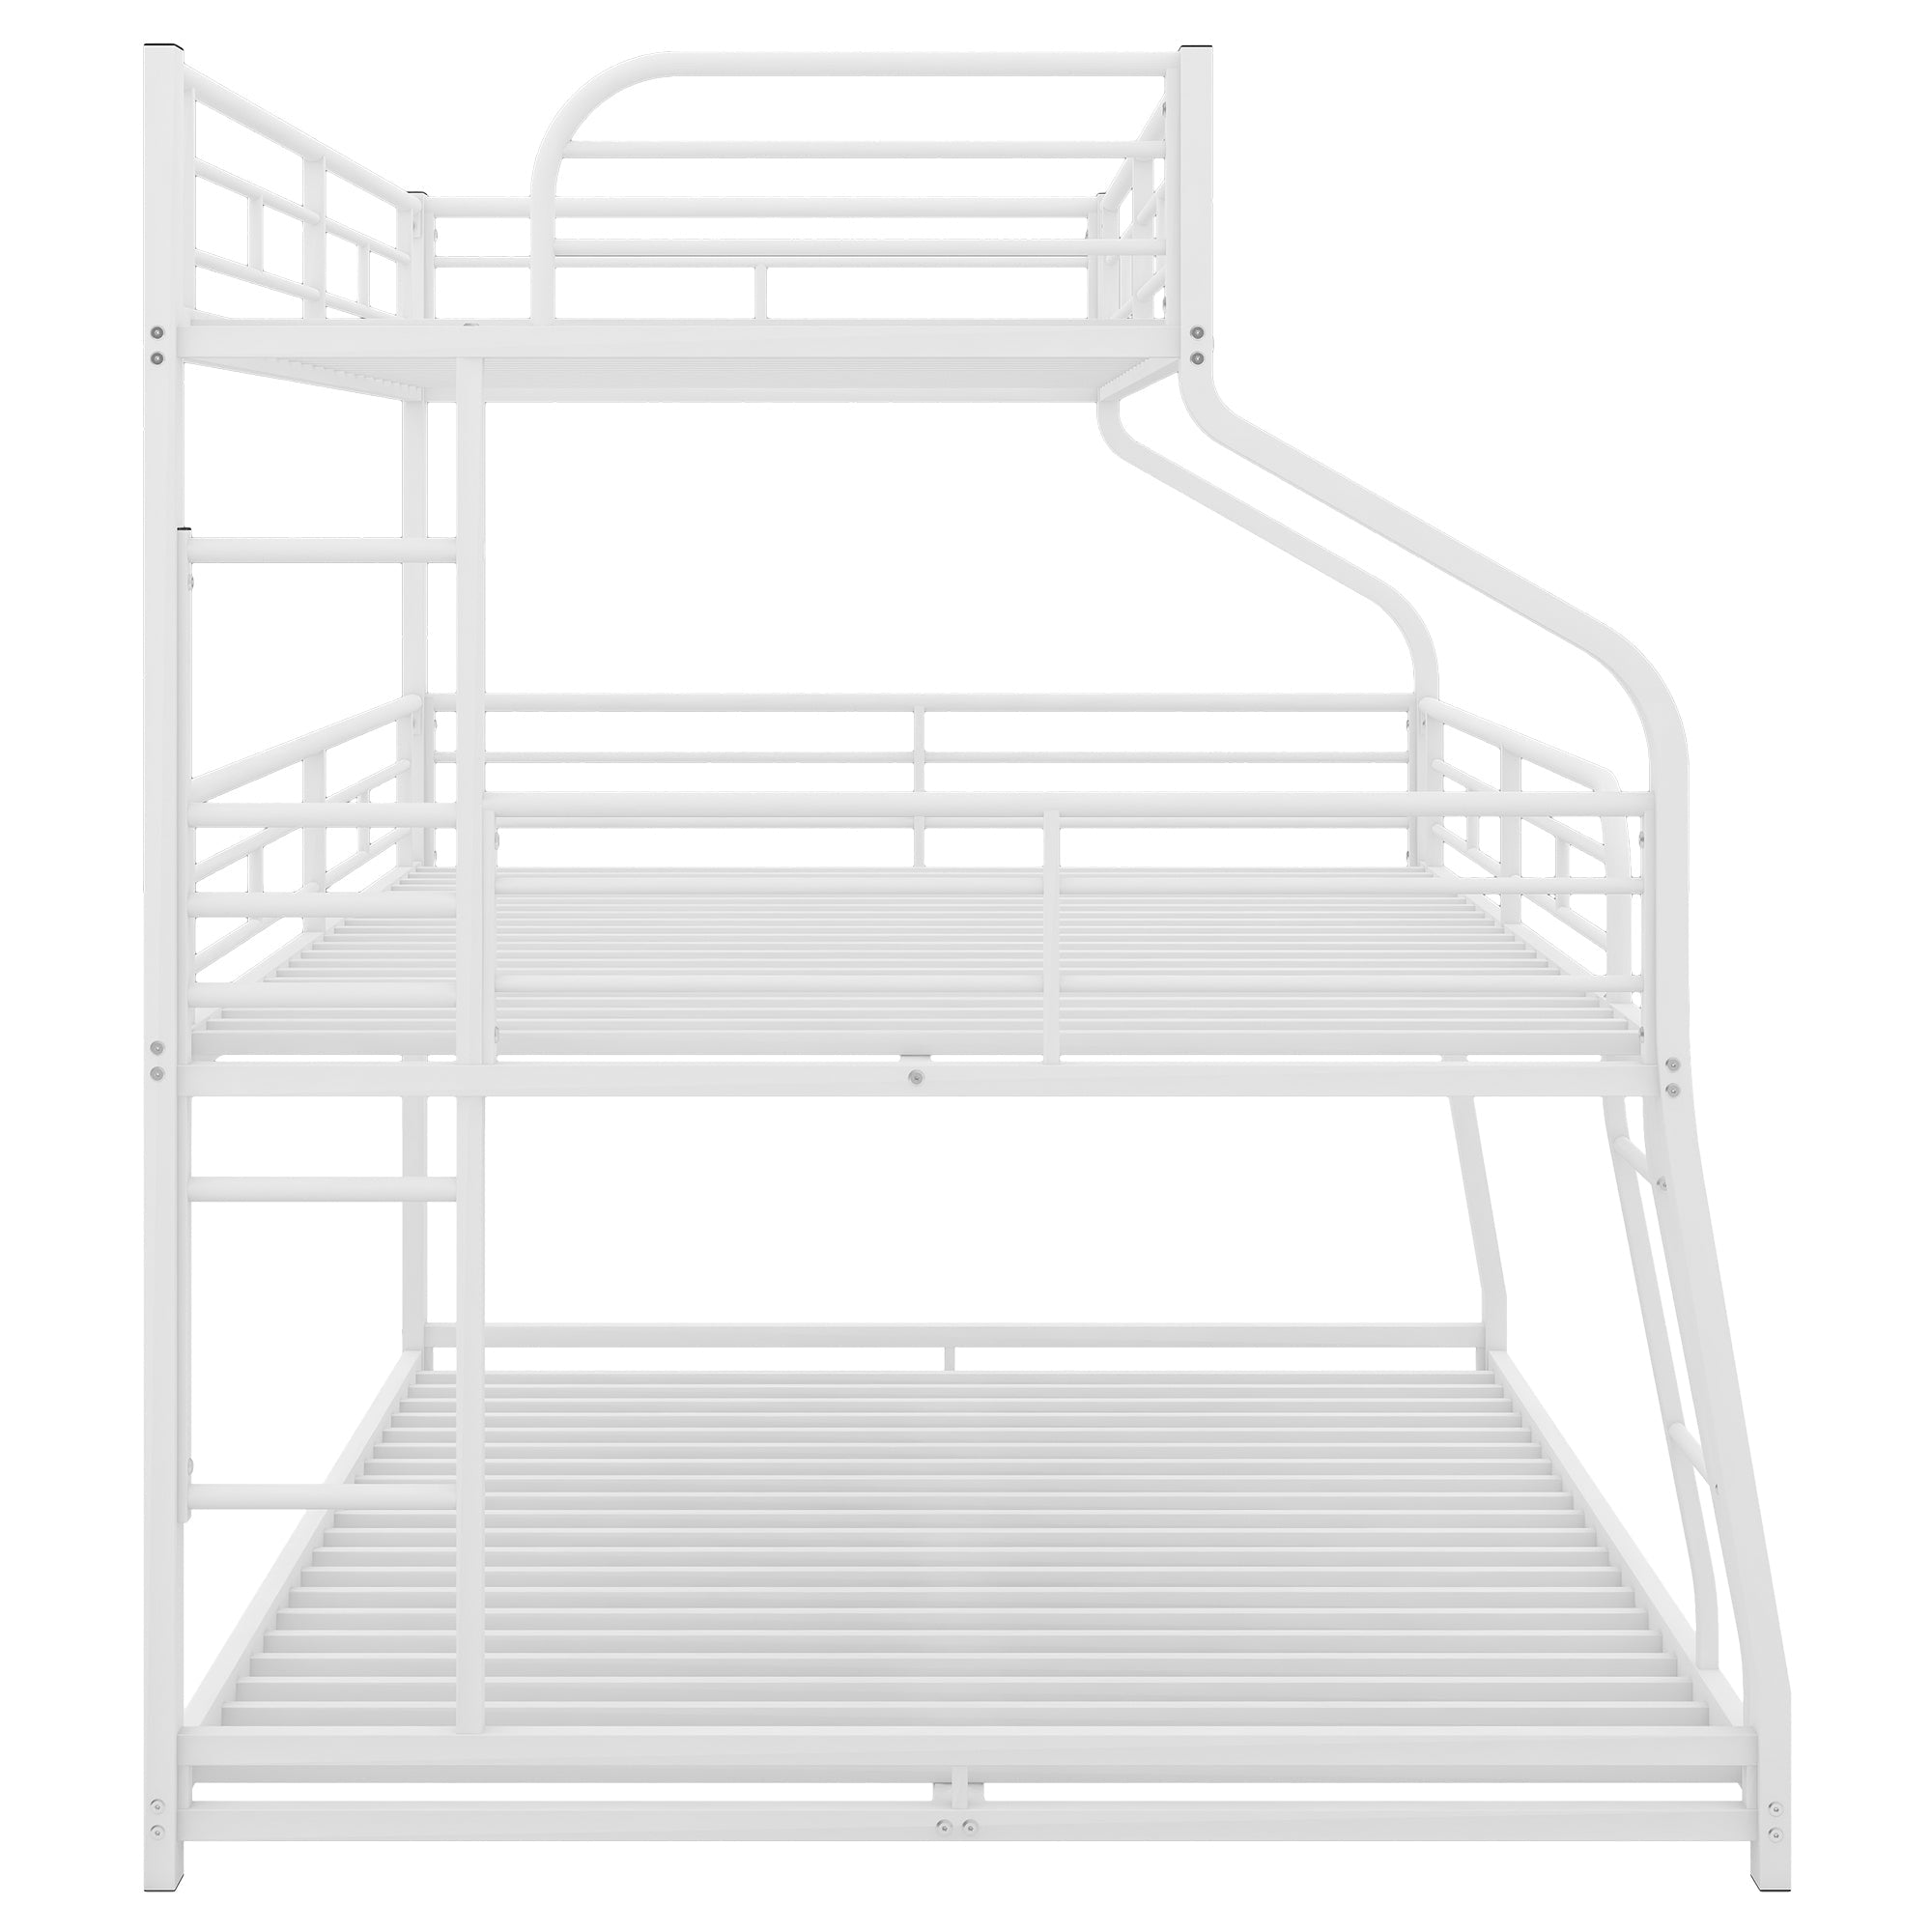 White Twin XL/Full XL Over Queen Triple Bunk Bed with Ladders & Full Guardrails